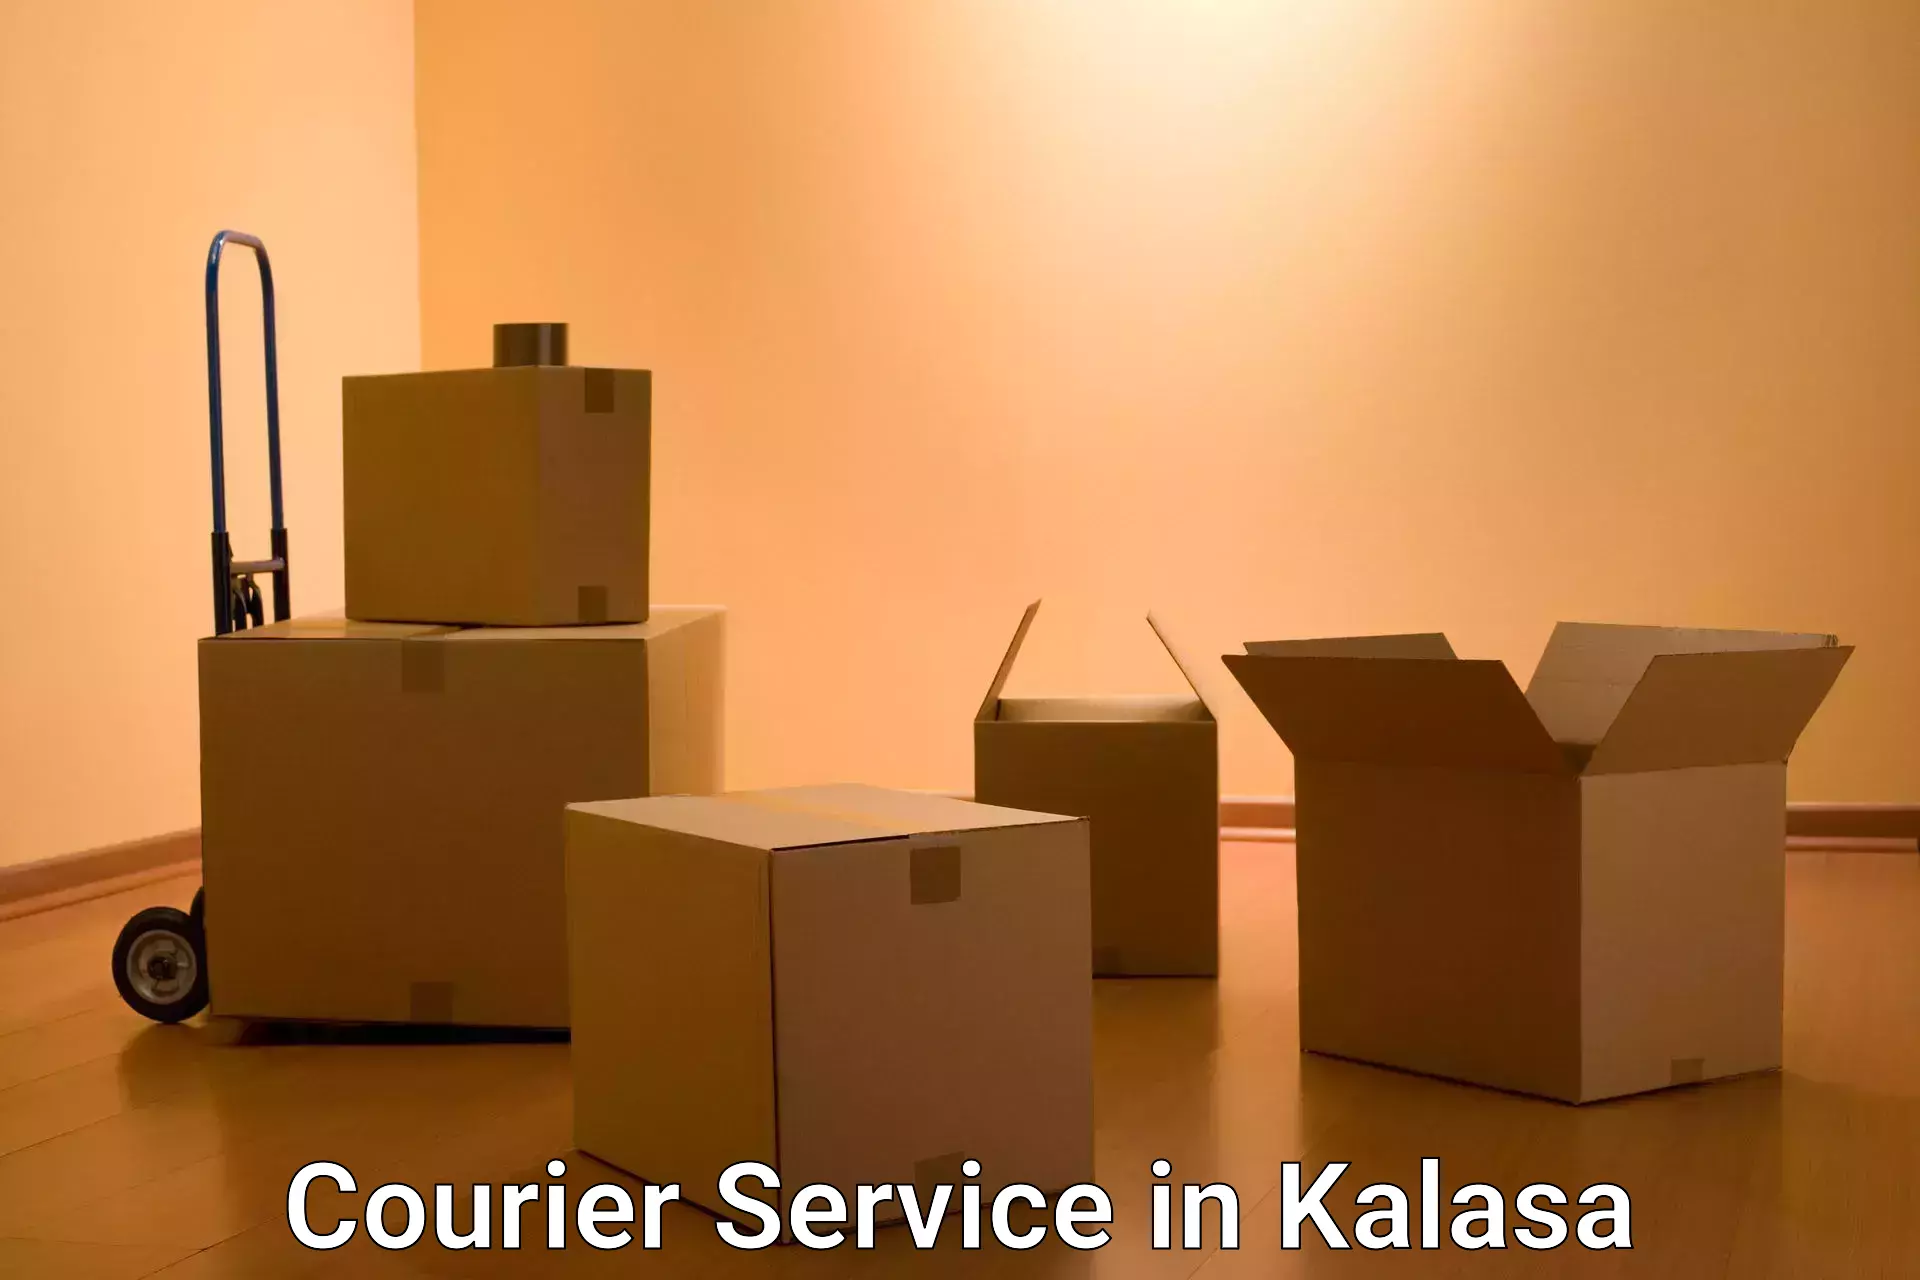 Same-day delivery solutions in Kalasa